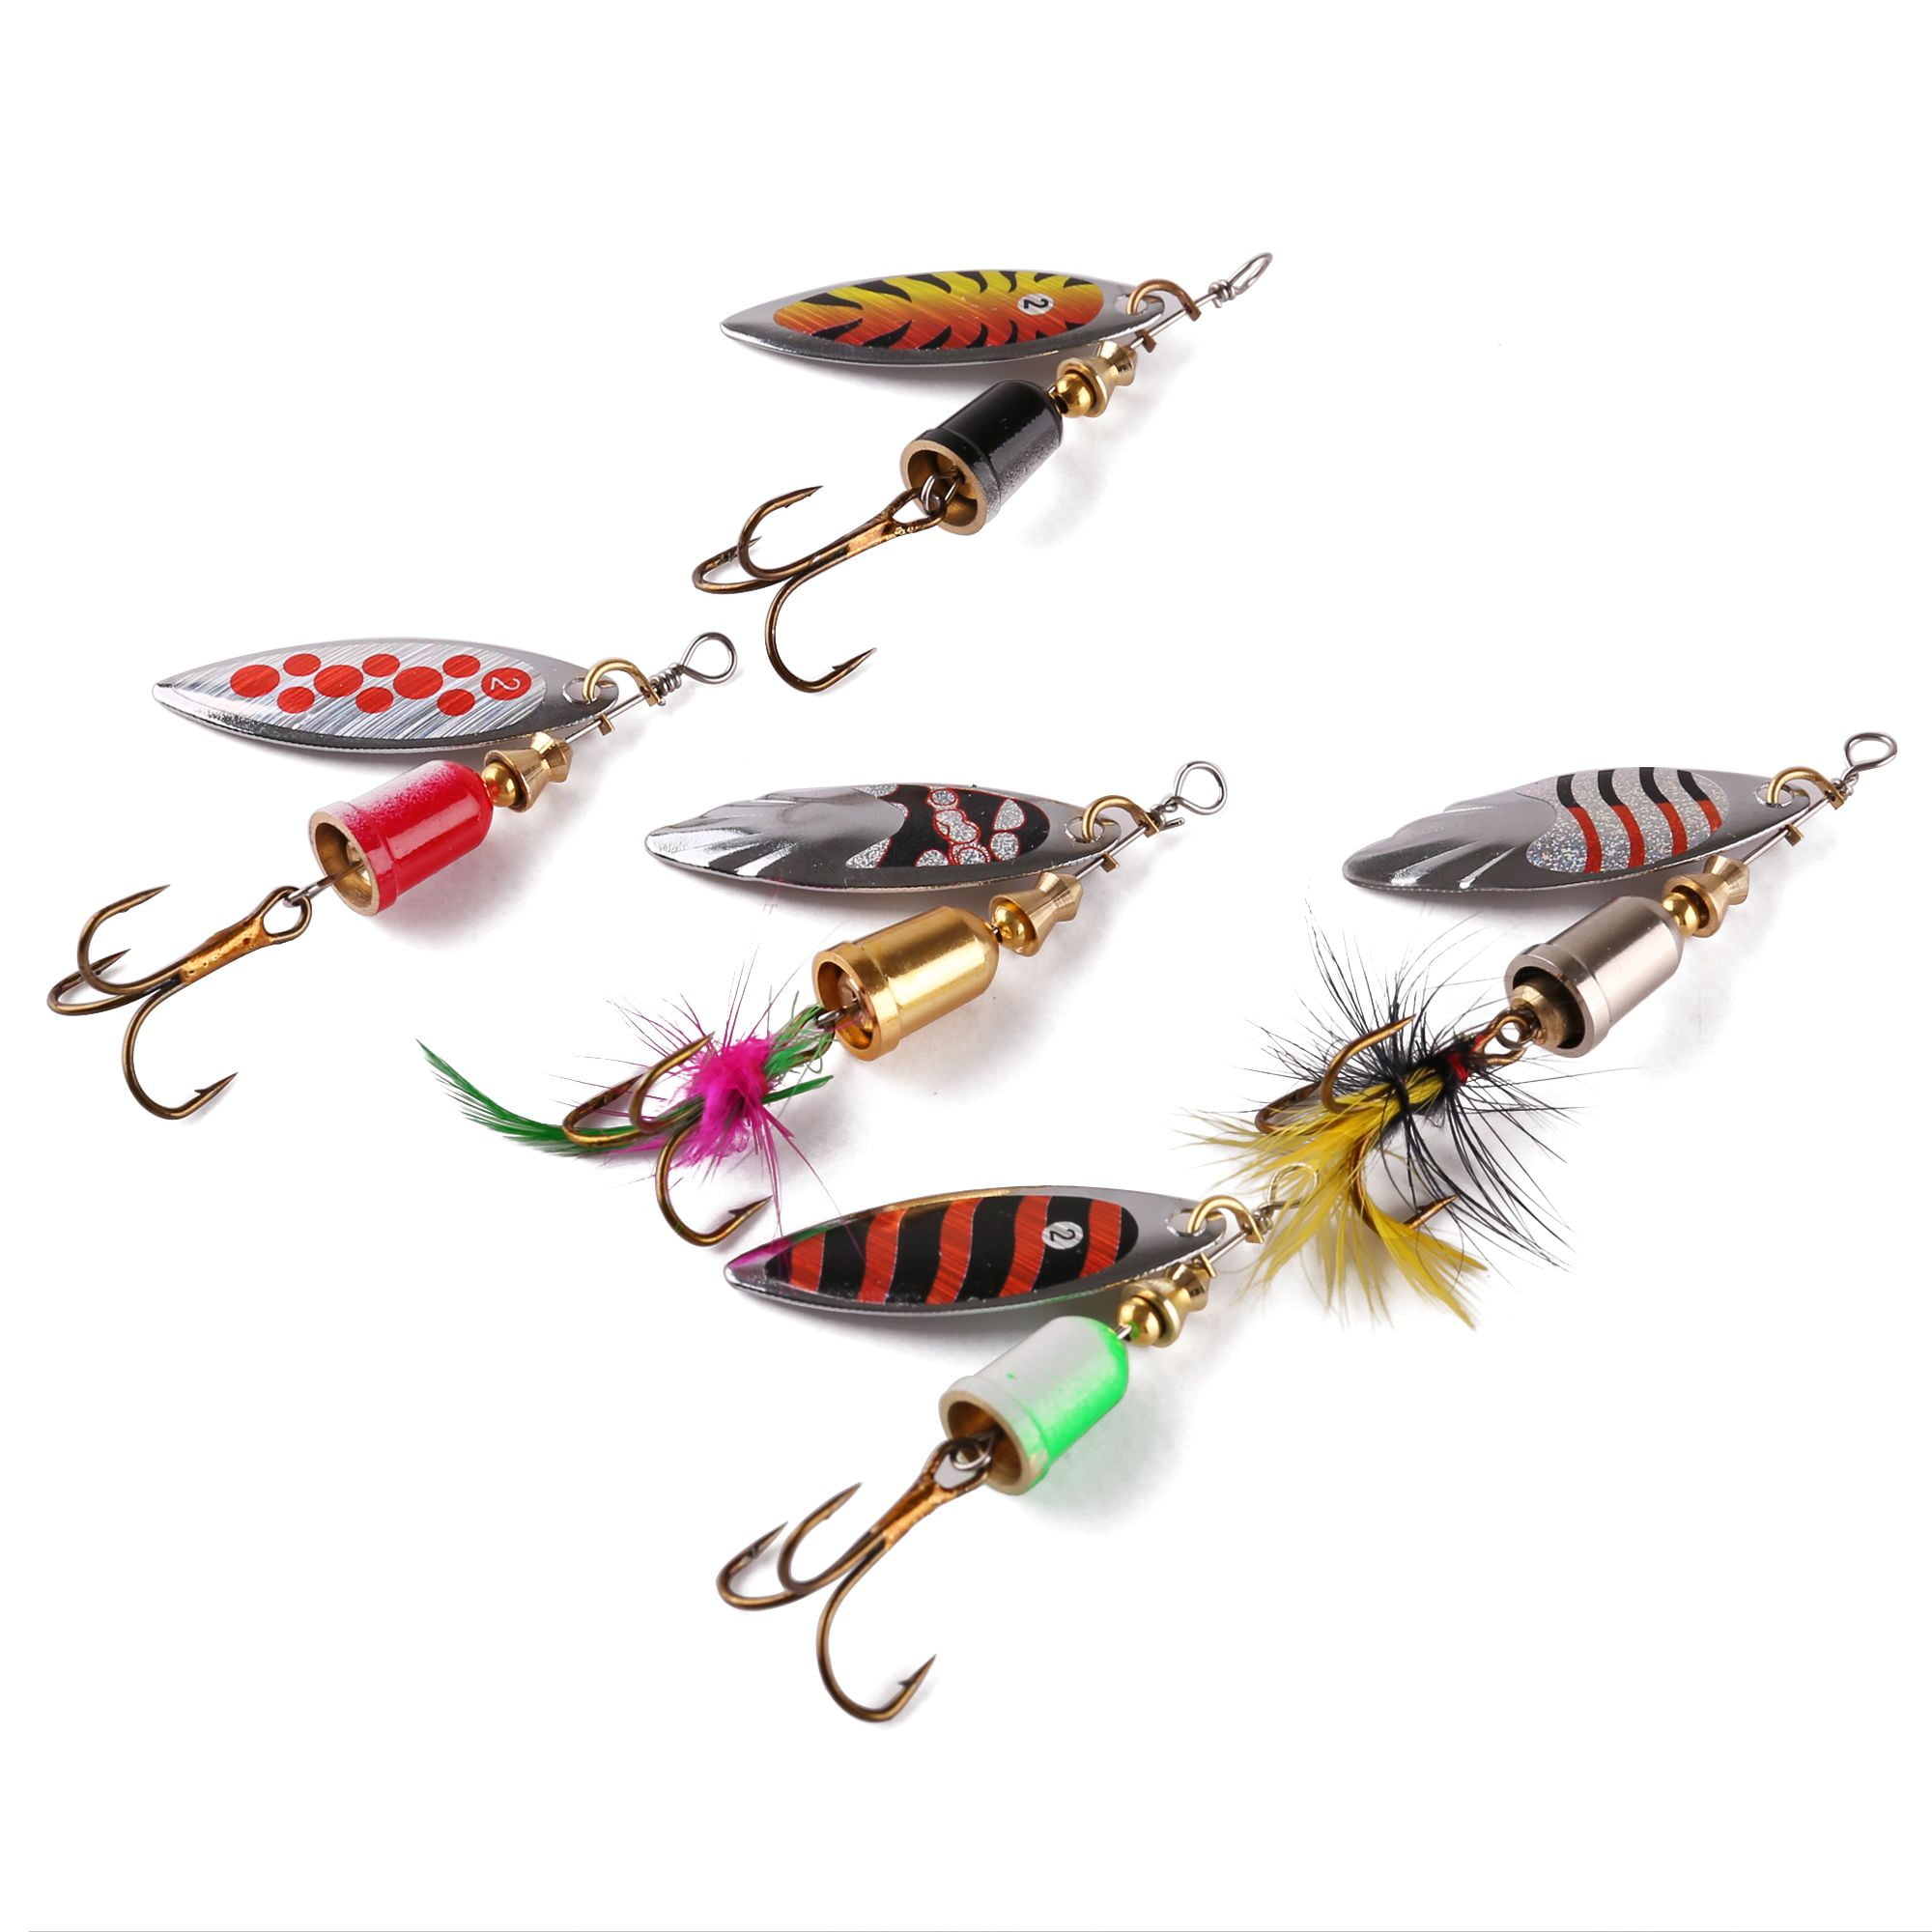 Buy Magreel 10pcs Spinnerbait, Bass Trout Salmon Fishing Lures, Hard Metal Spinner  Baits with a Tackle Box Online at Low Prices in India 